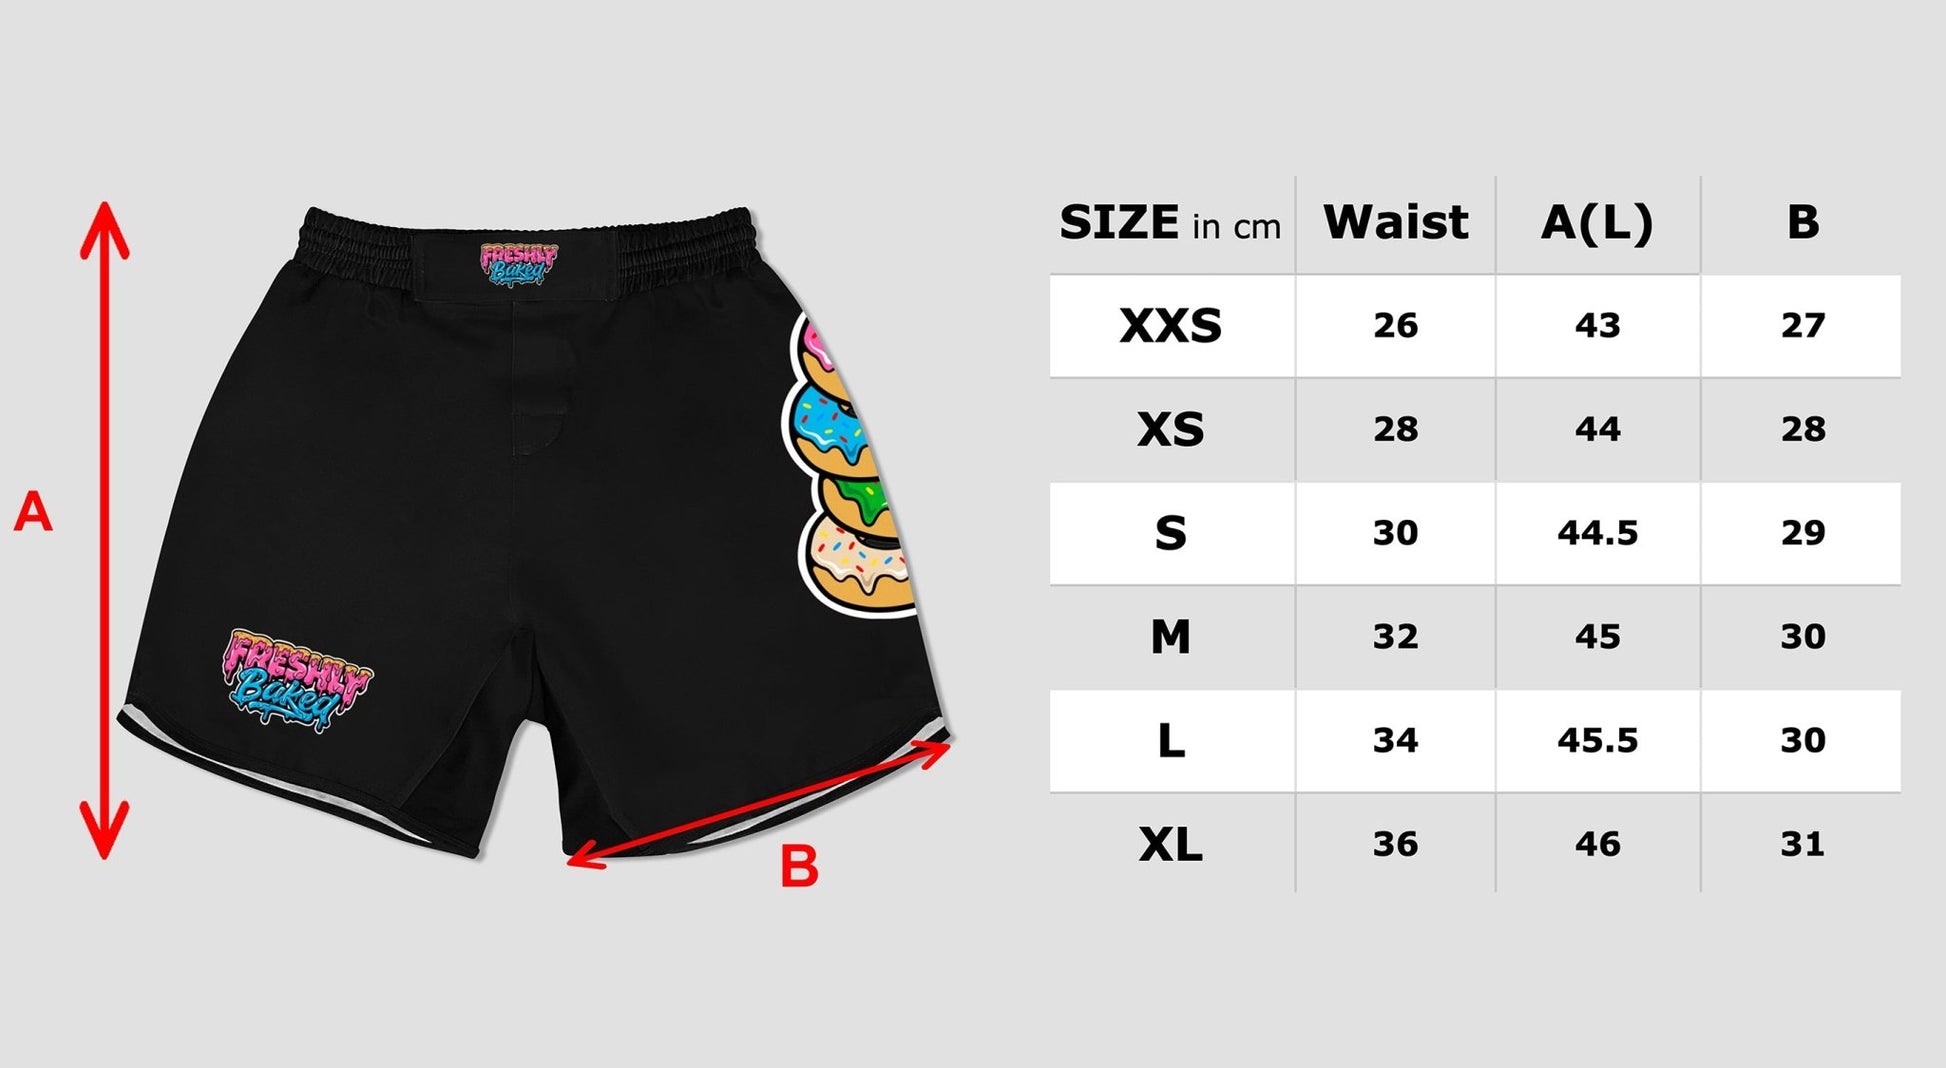 Rolling Stoned Grappling Shorts - Freshly Baked FightwearShorts